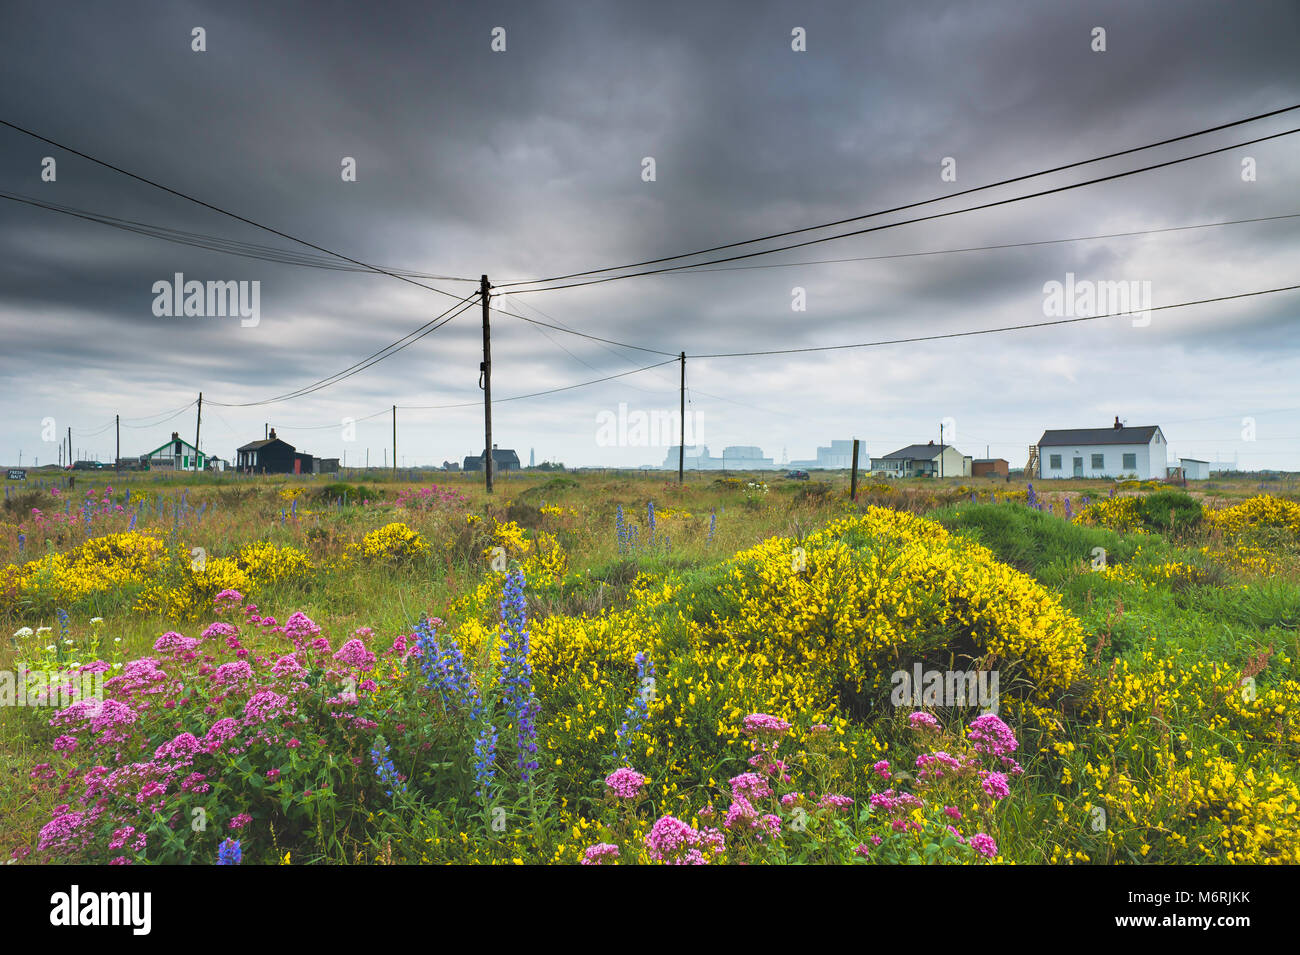 Ealry morning view of Dungeness with its scatter of wooden buildings and telephone poles. Stock Photo